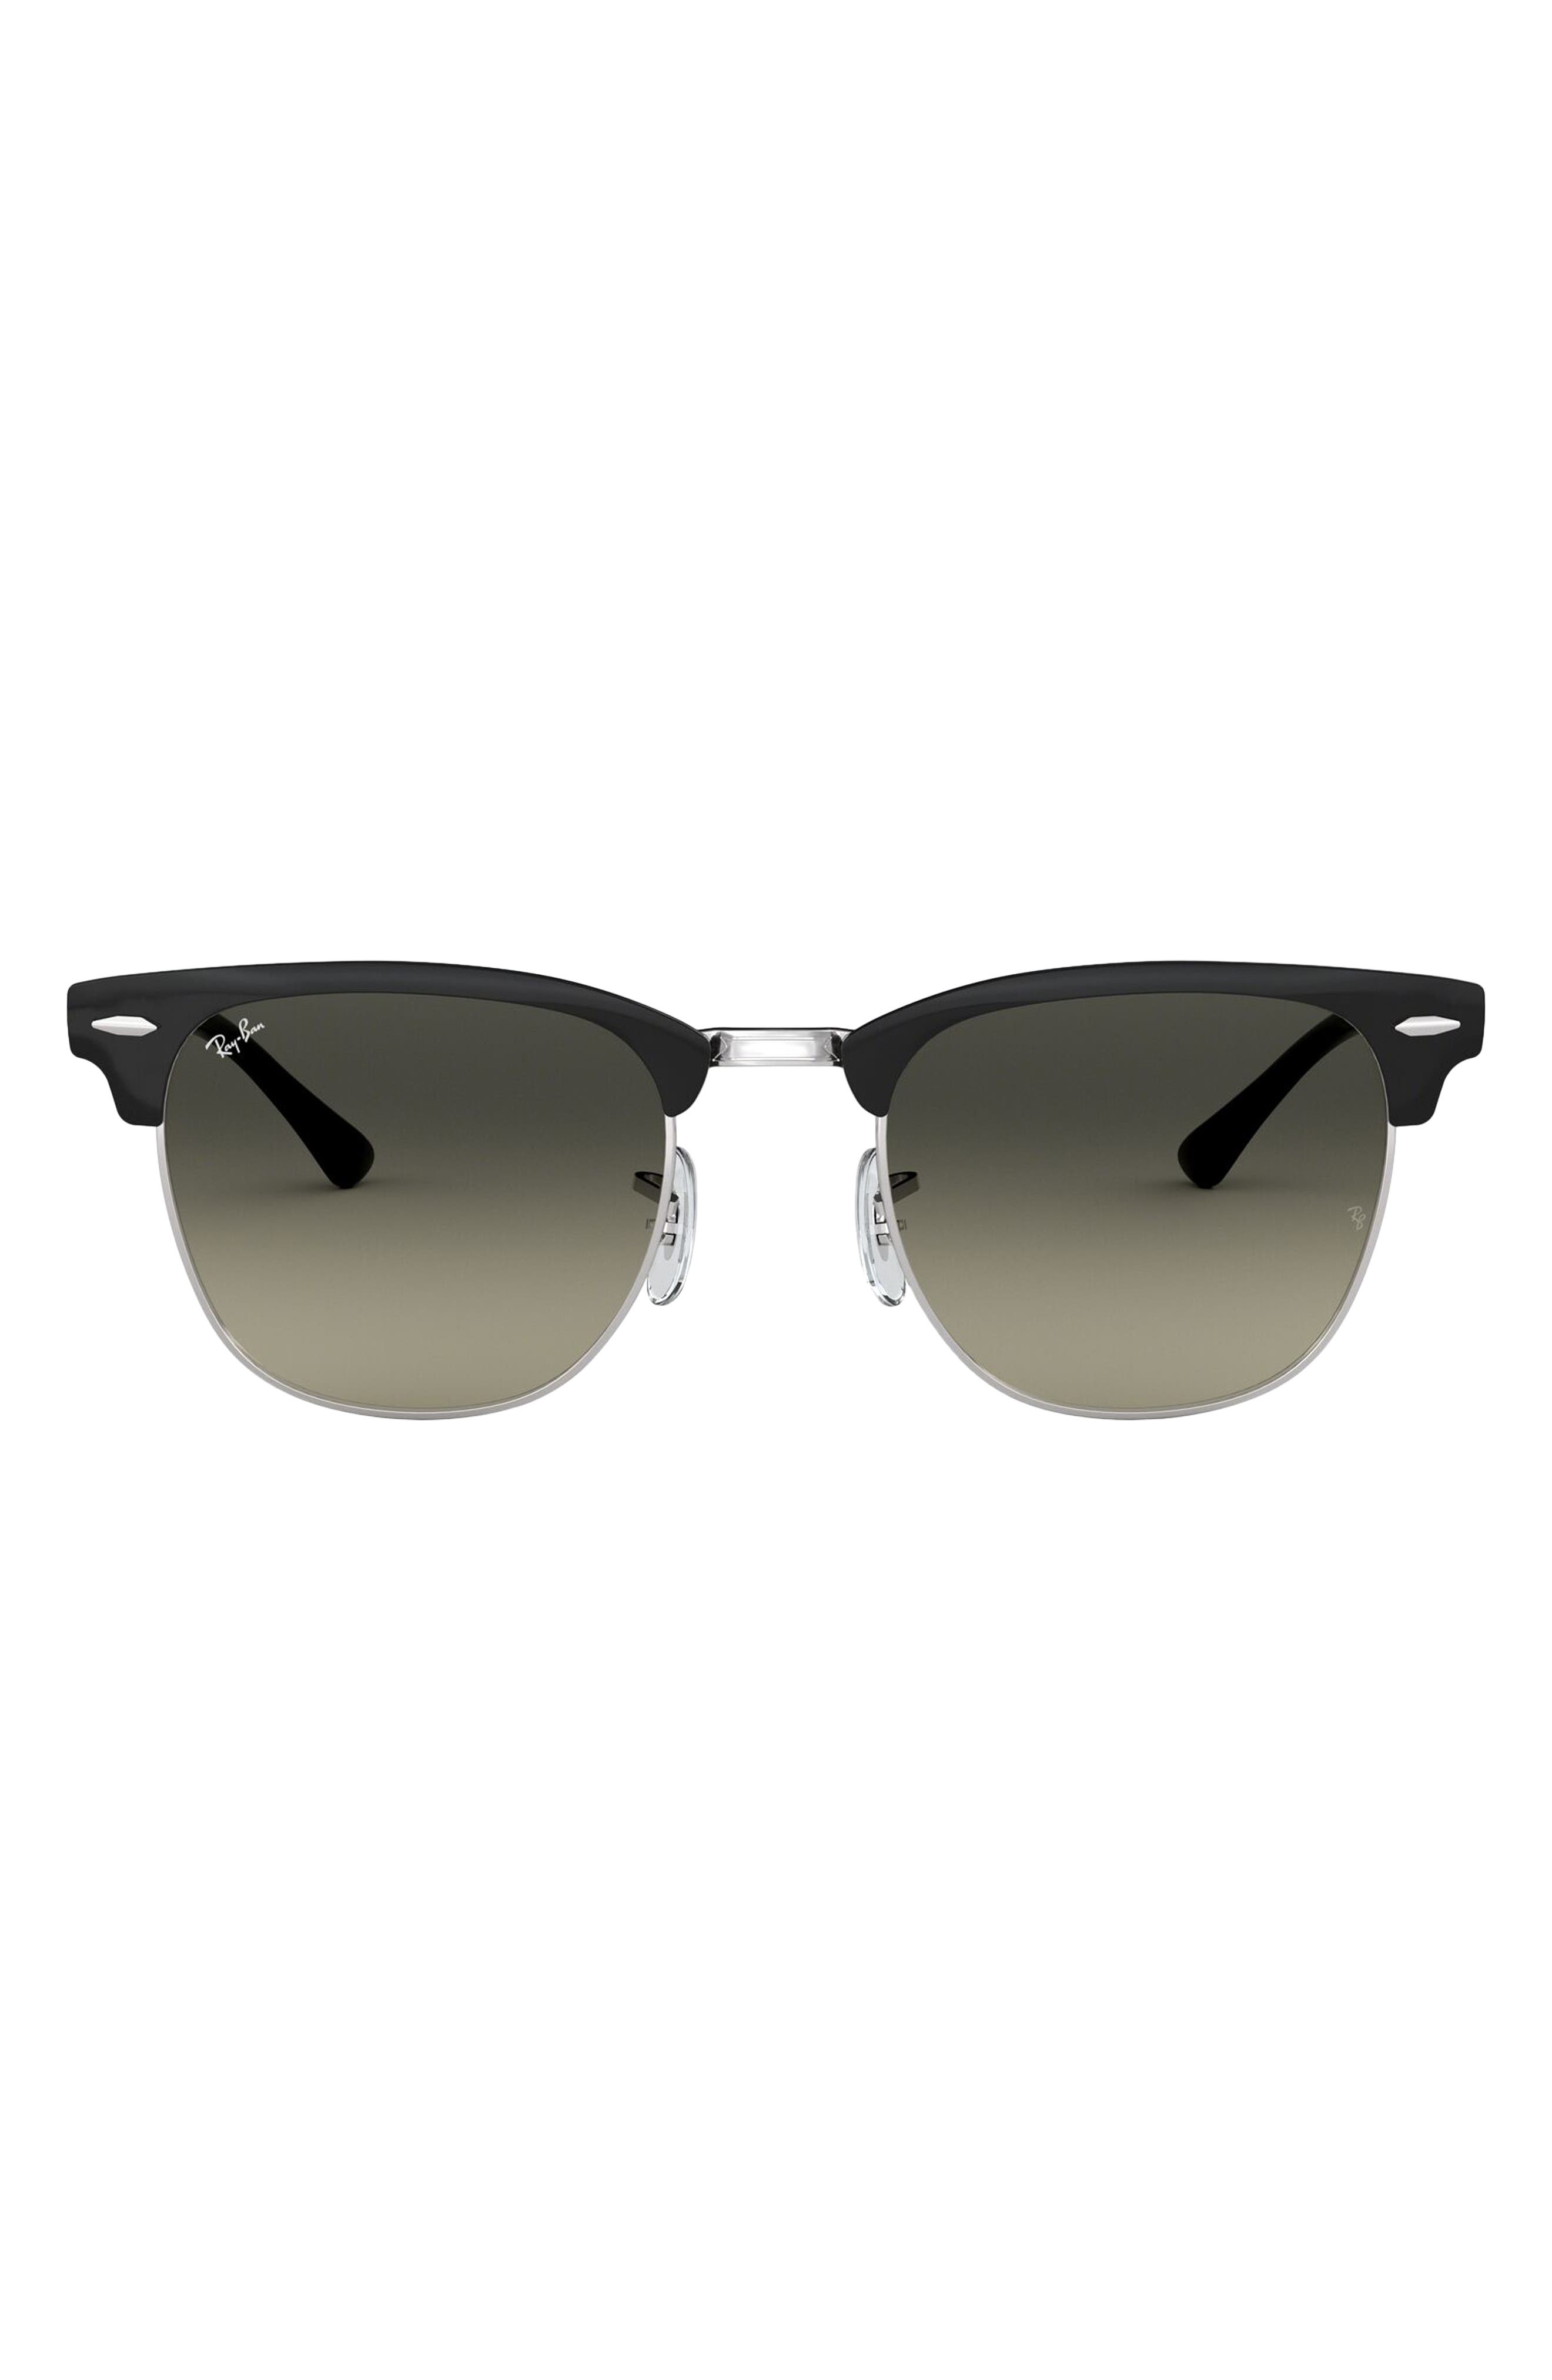 clubmaster sunglasses for women